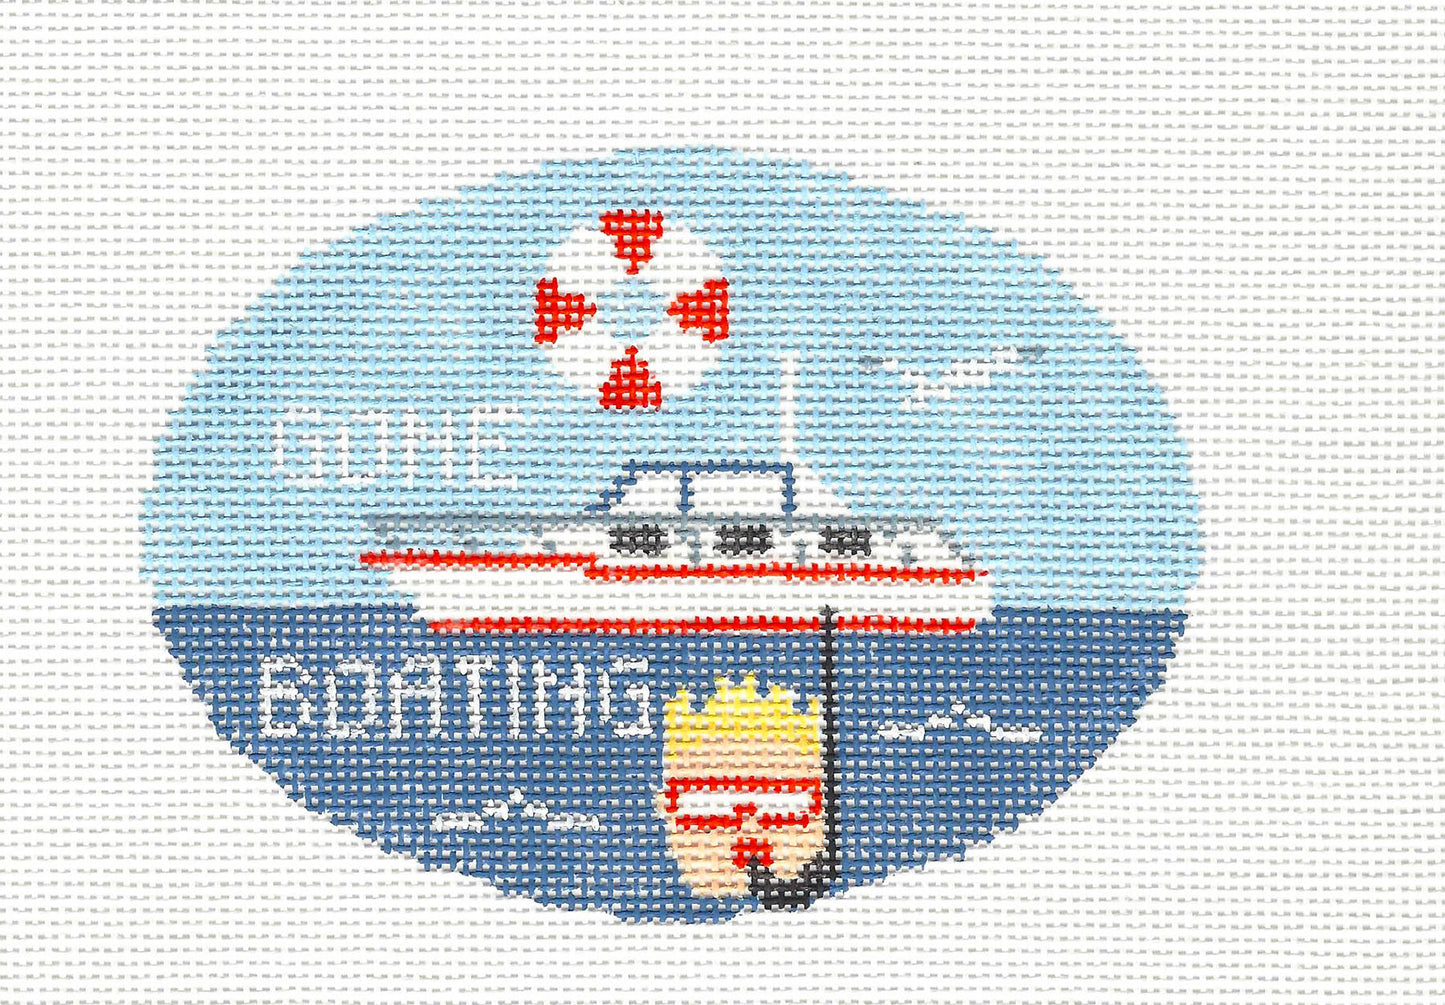 Oval ~ Gone Power Boating handpainted Needlepoint Canvas by Kathy Schenkel